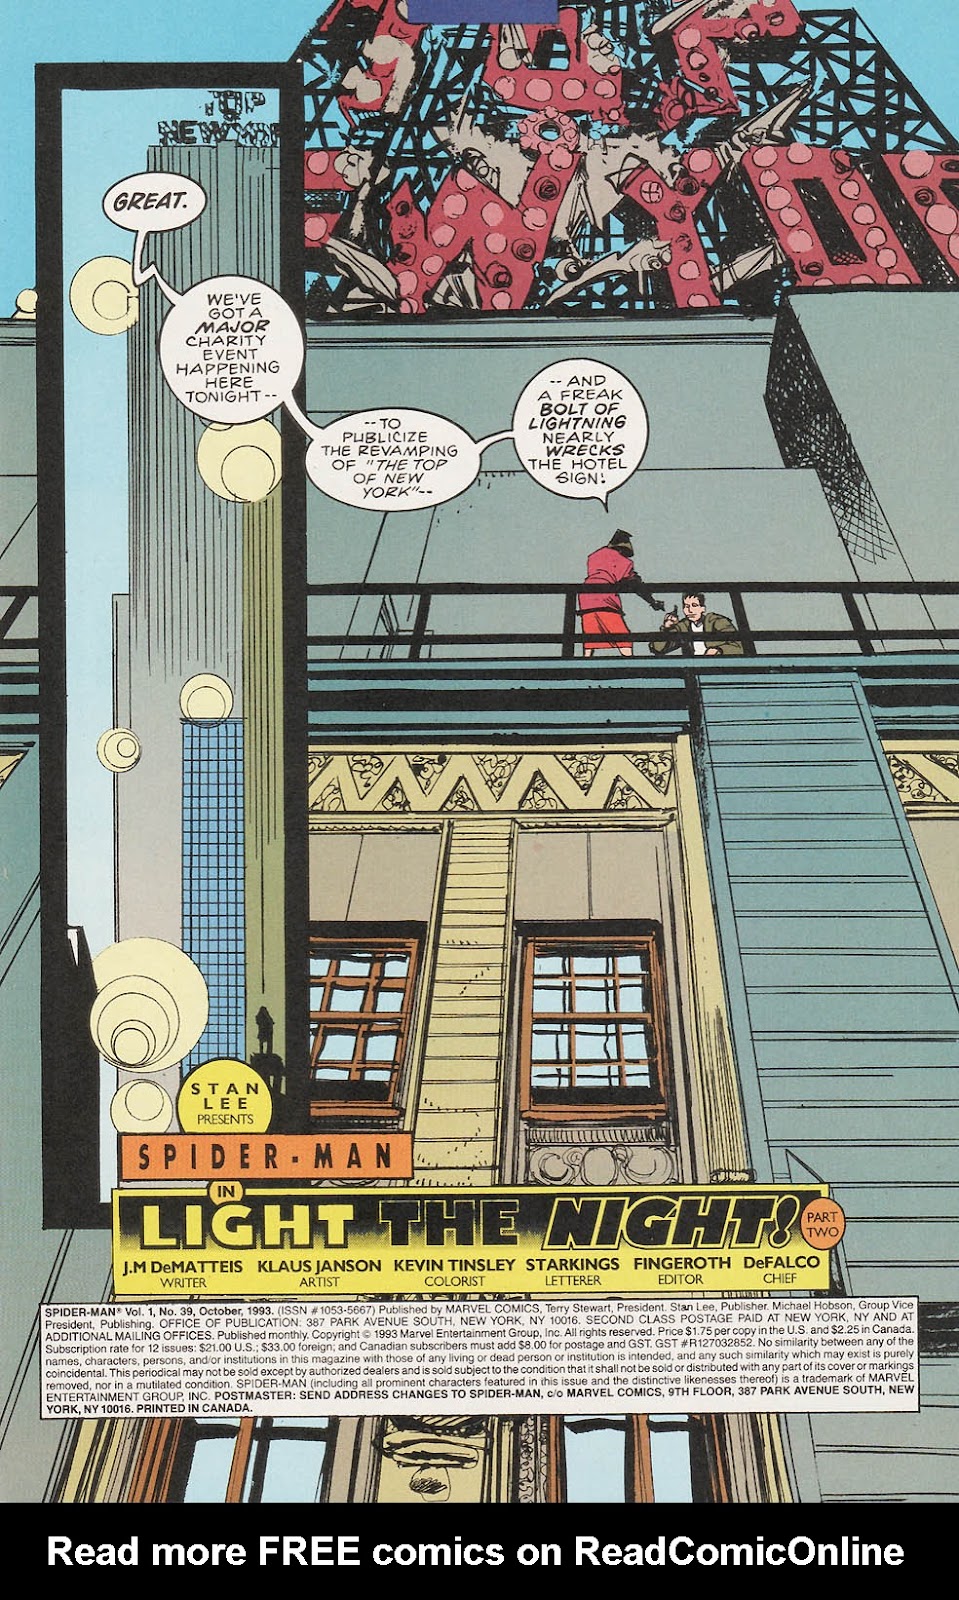 <{ $series->title }} issue 39 - Light The Night Part 2 of 3 - Page 2